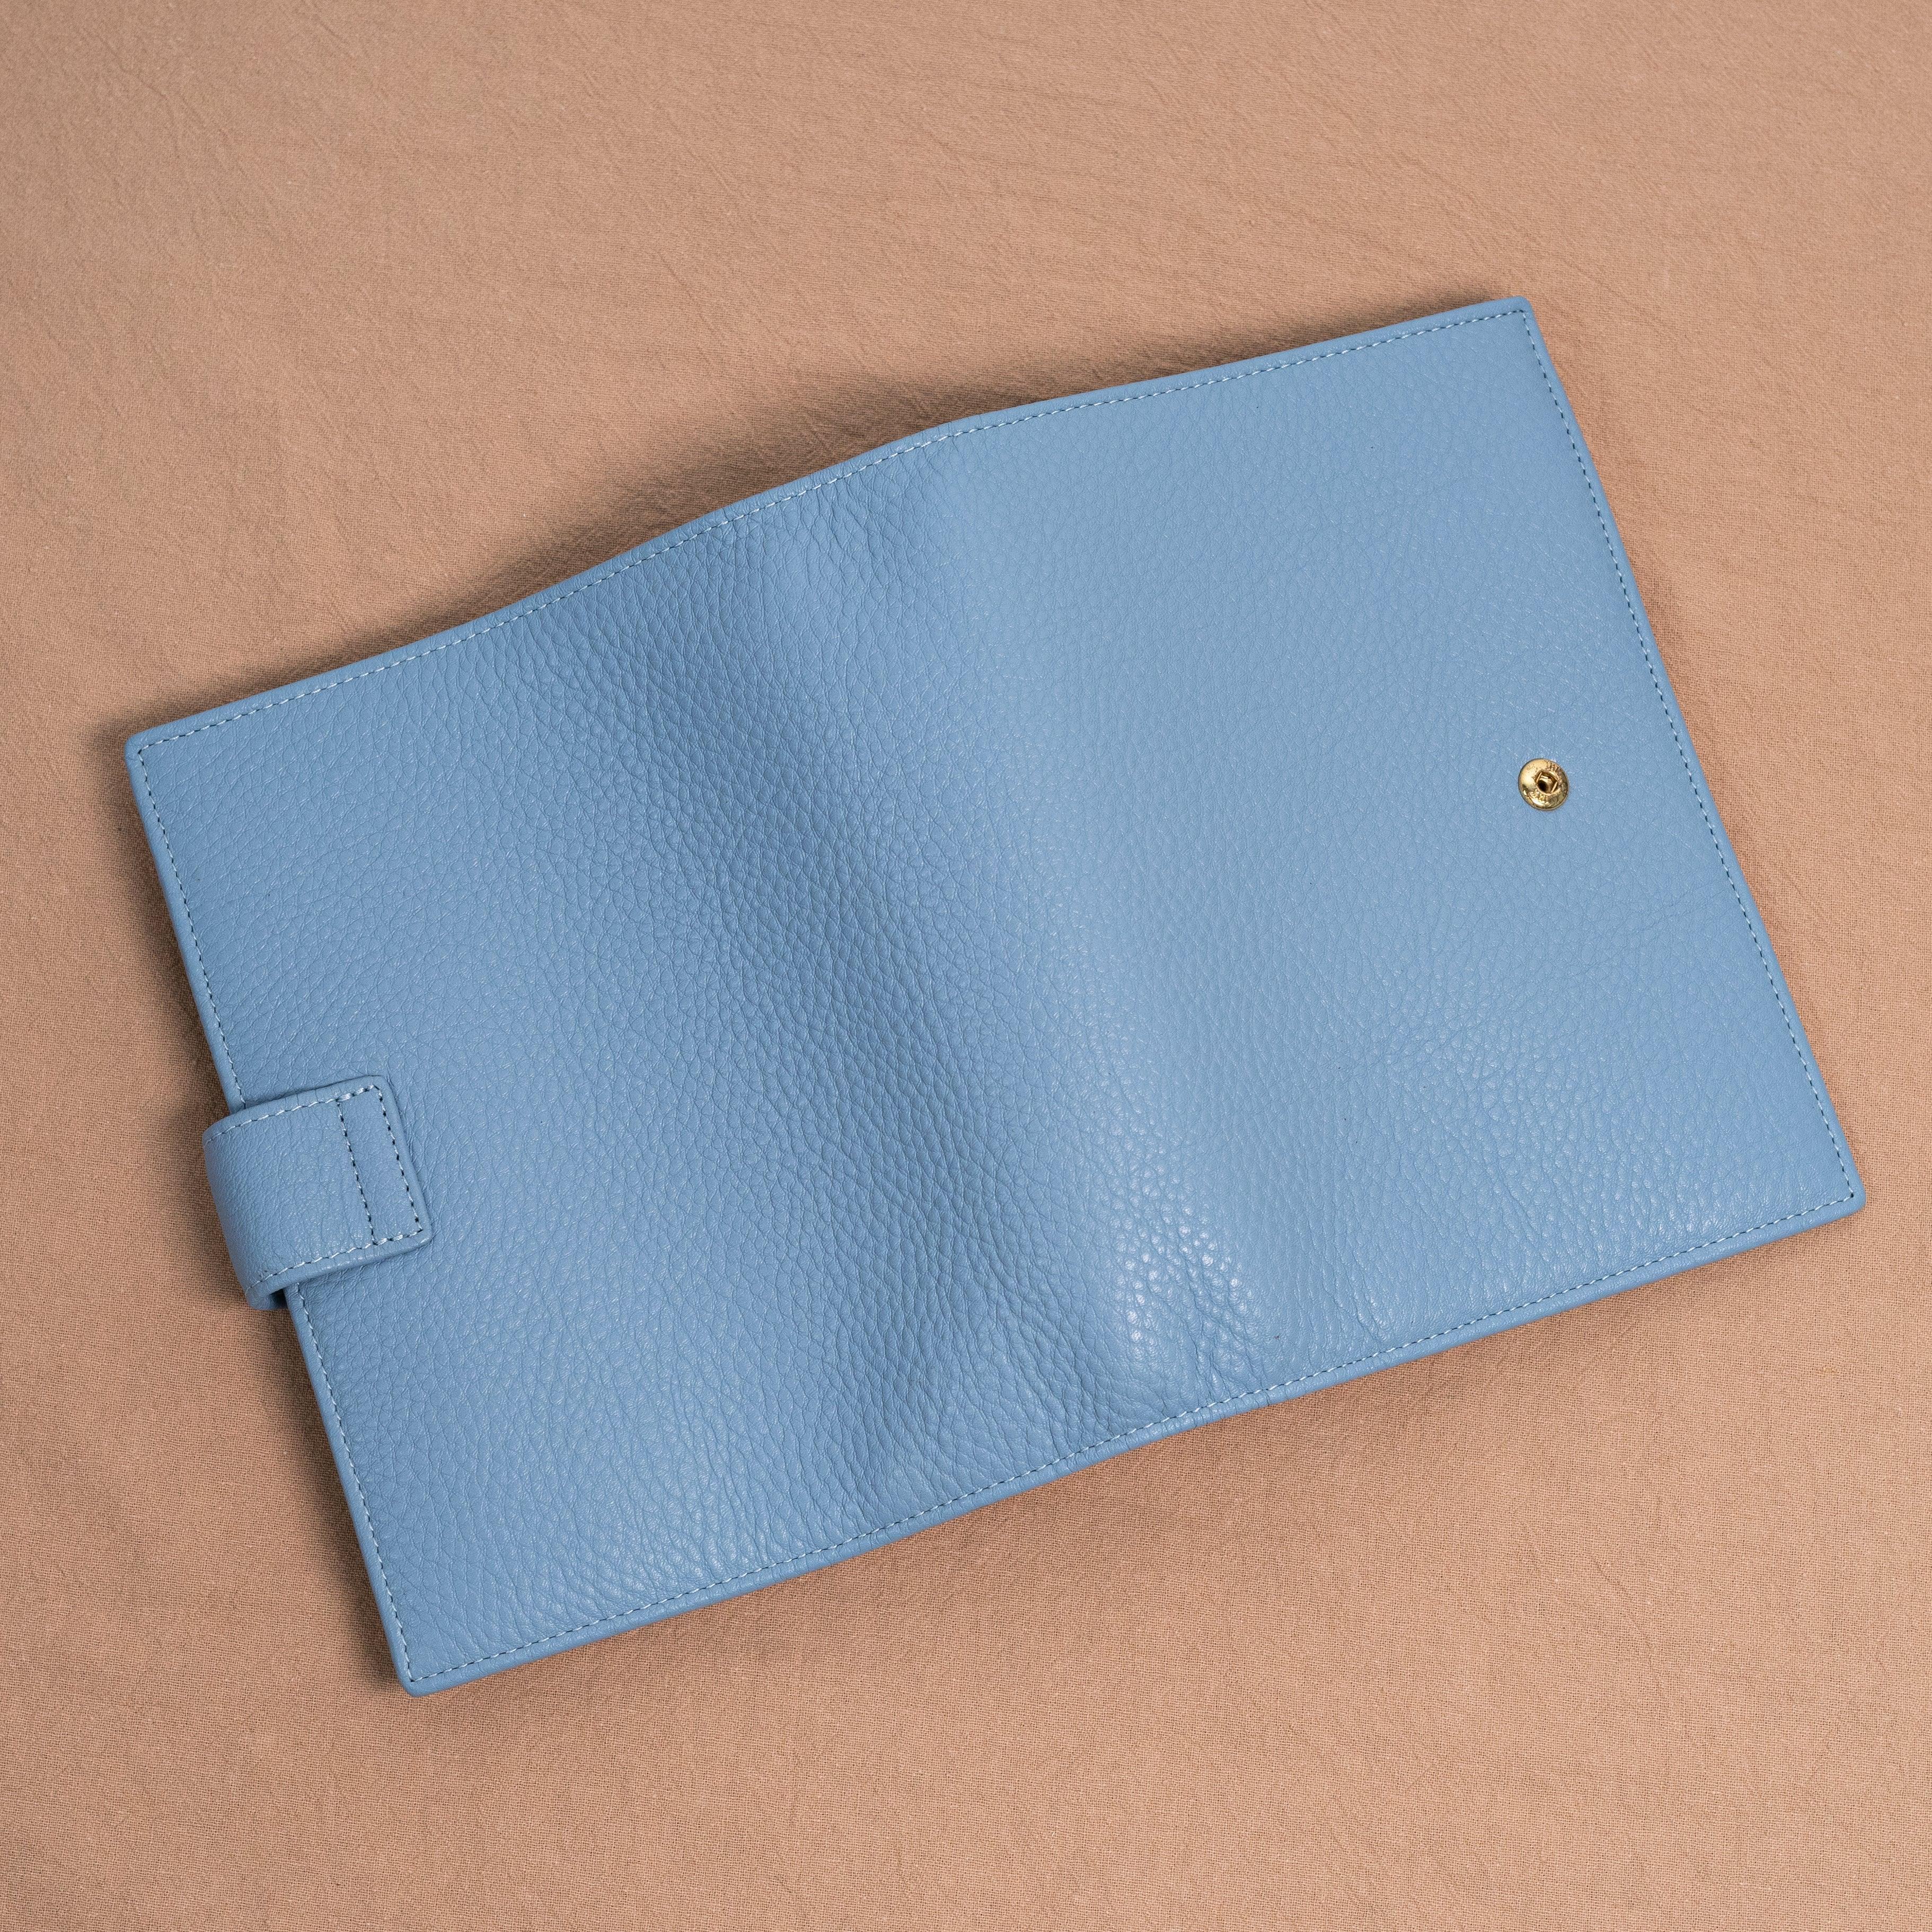 A6 Personal / Bible Lychee Grain &amp; Nappa Leather Planner - Baby Blue x Light Blue - Techo Treats